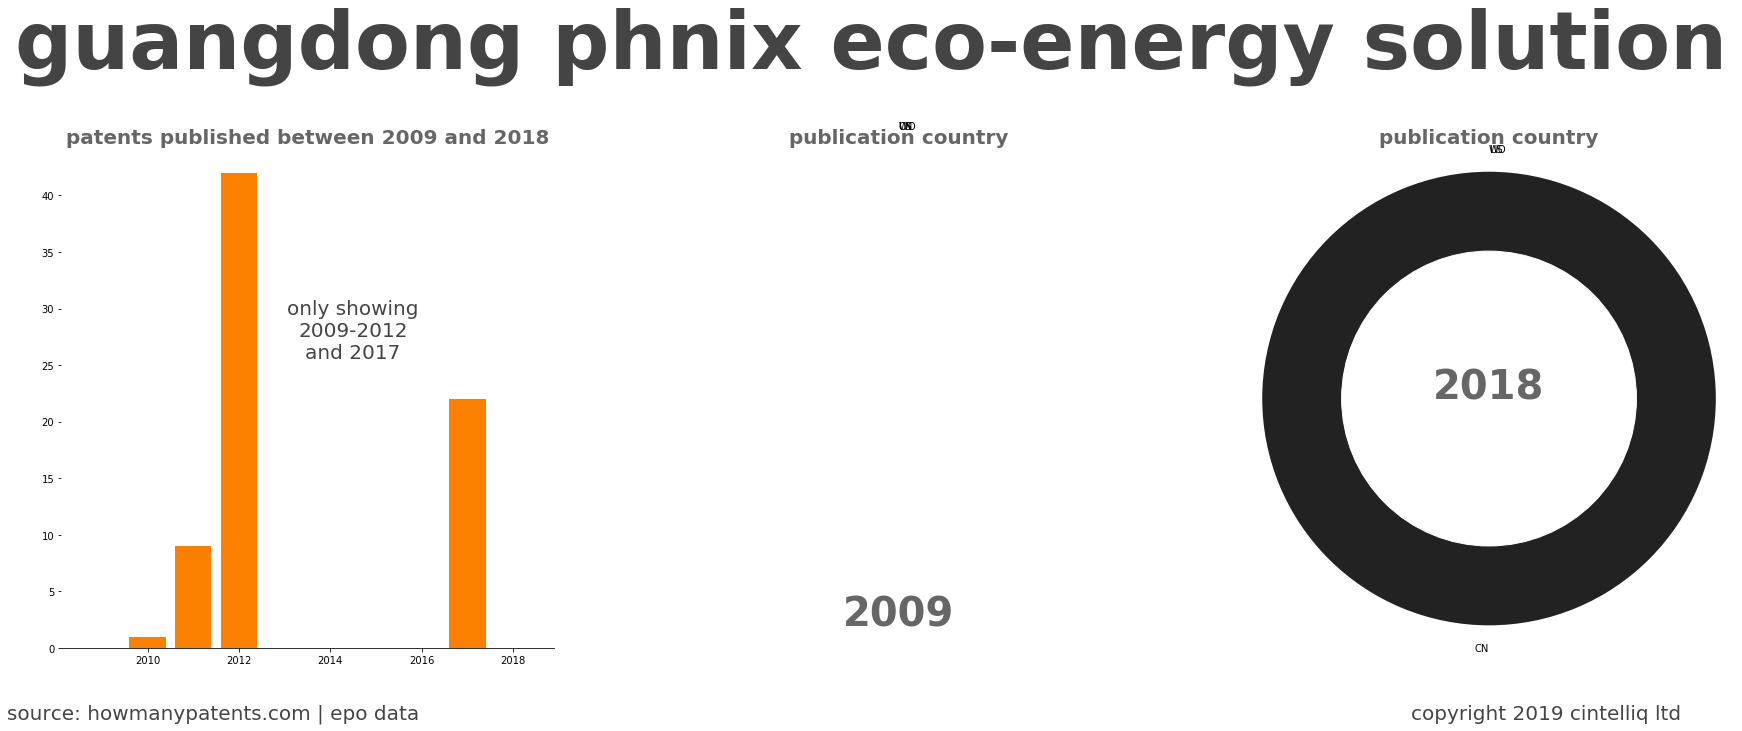 summary of patents for Guangdong Phnix Eco-Energy Solution